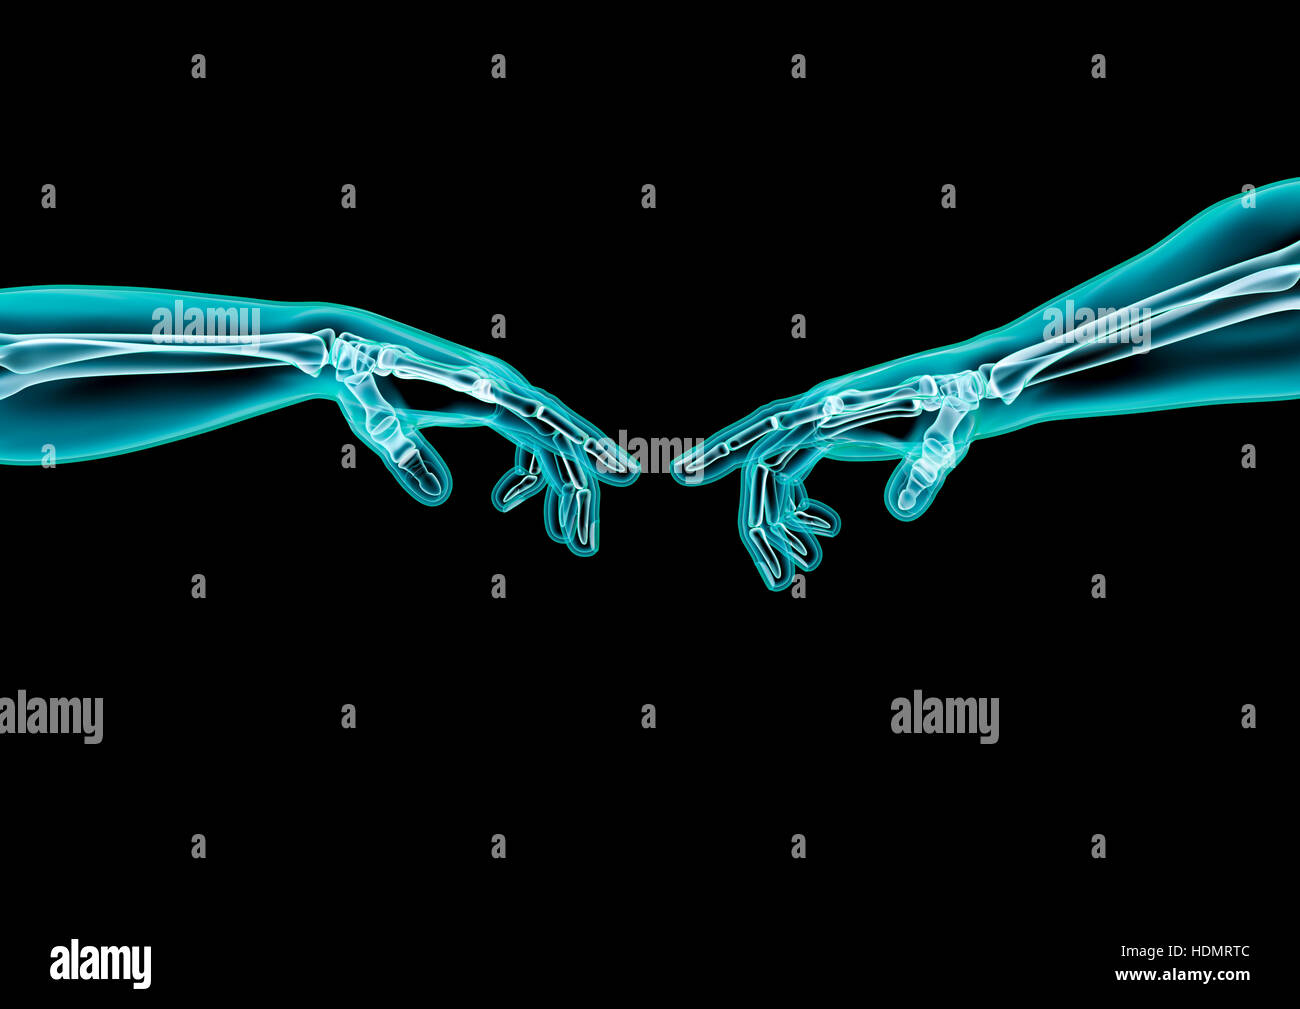 Creation hands x-ray / 3D illustration of x-rayed hands reaching to touch fingers Stock Photo